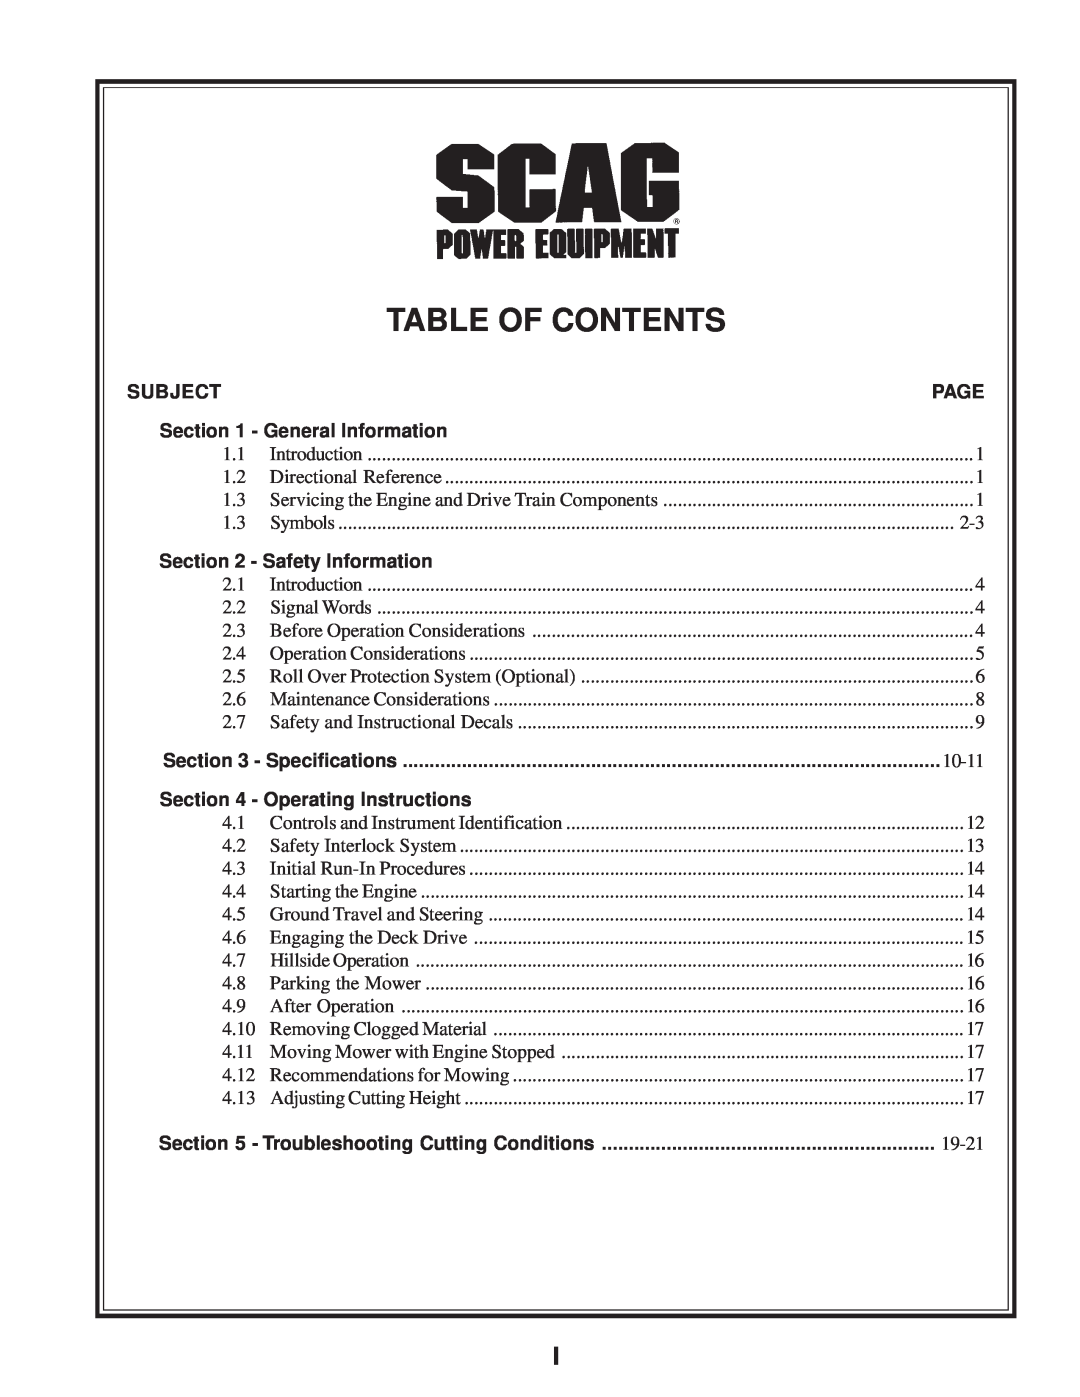 Scag Power Equipment SZC manual Table Of Contents, Subject, General Information, Safety Information, Operating Instructions 